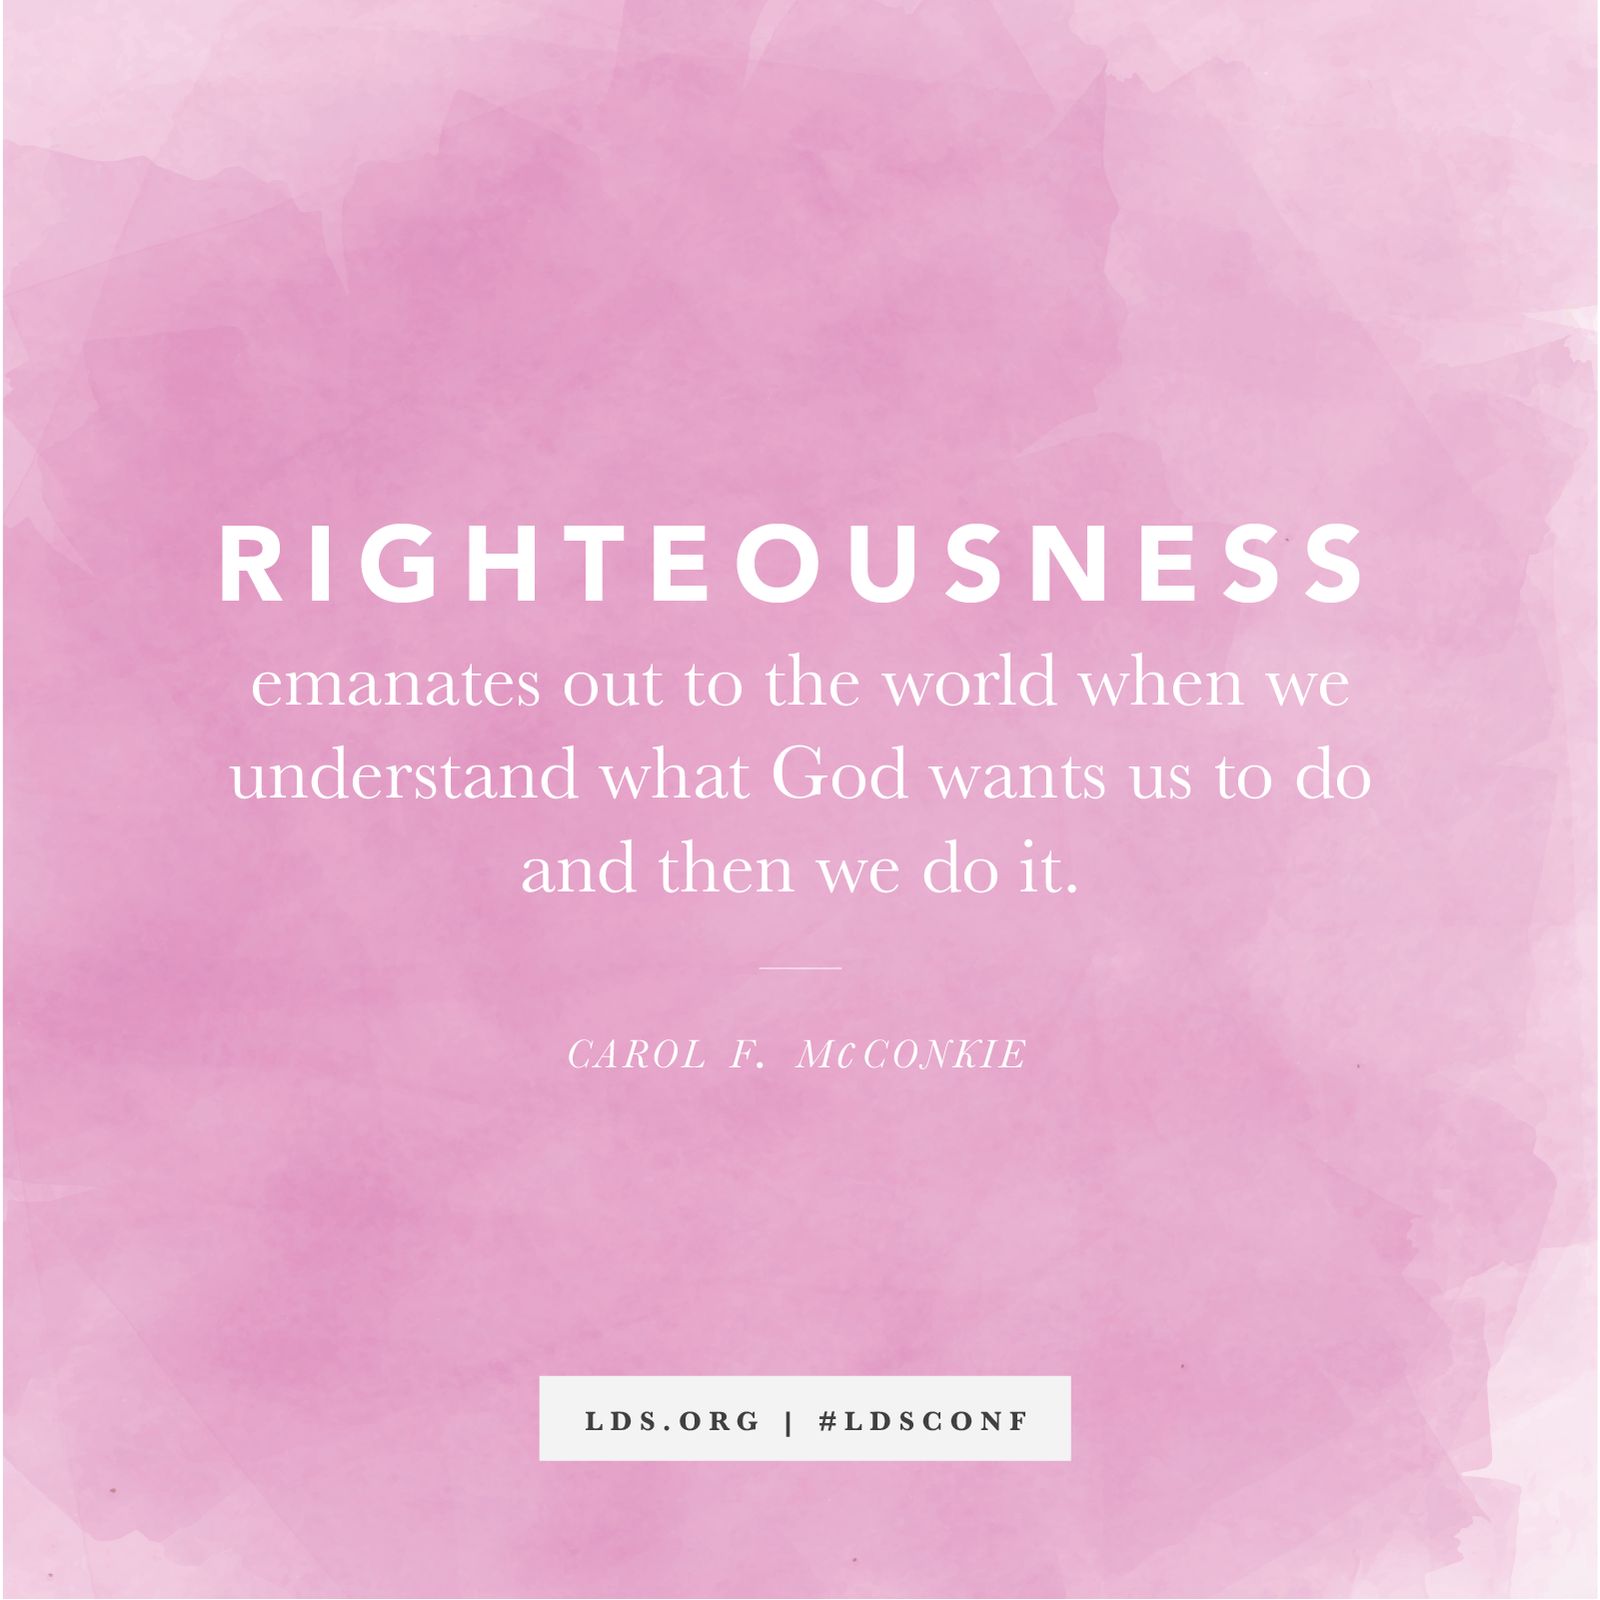 “Righteousness emanates out to the world when we understand what God wants us to do and then we do it.” —Carol F. McConkie, “Here to Serve a Righteous Cause”